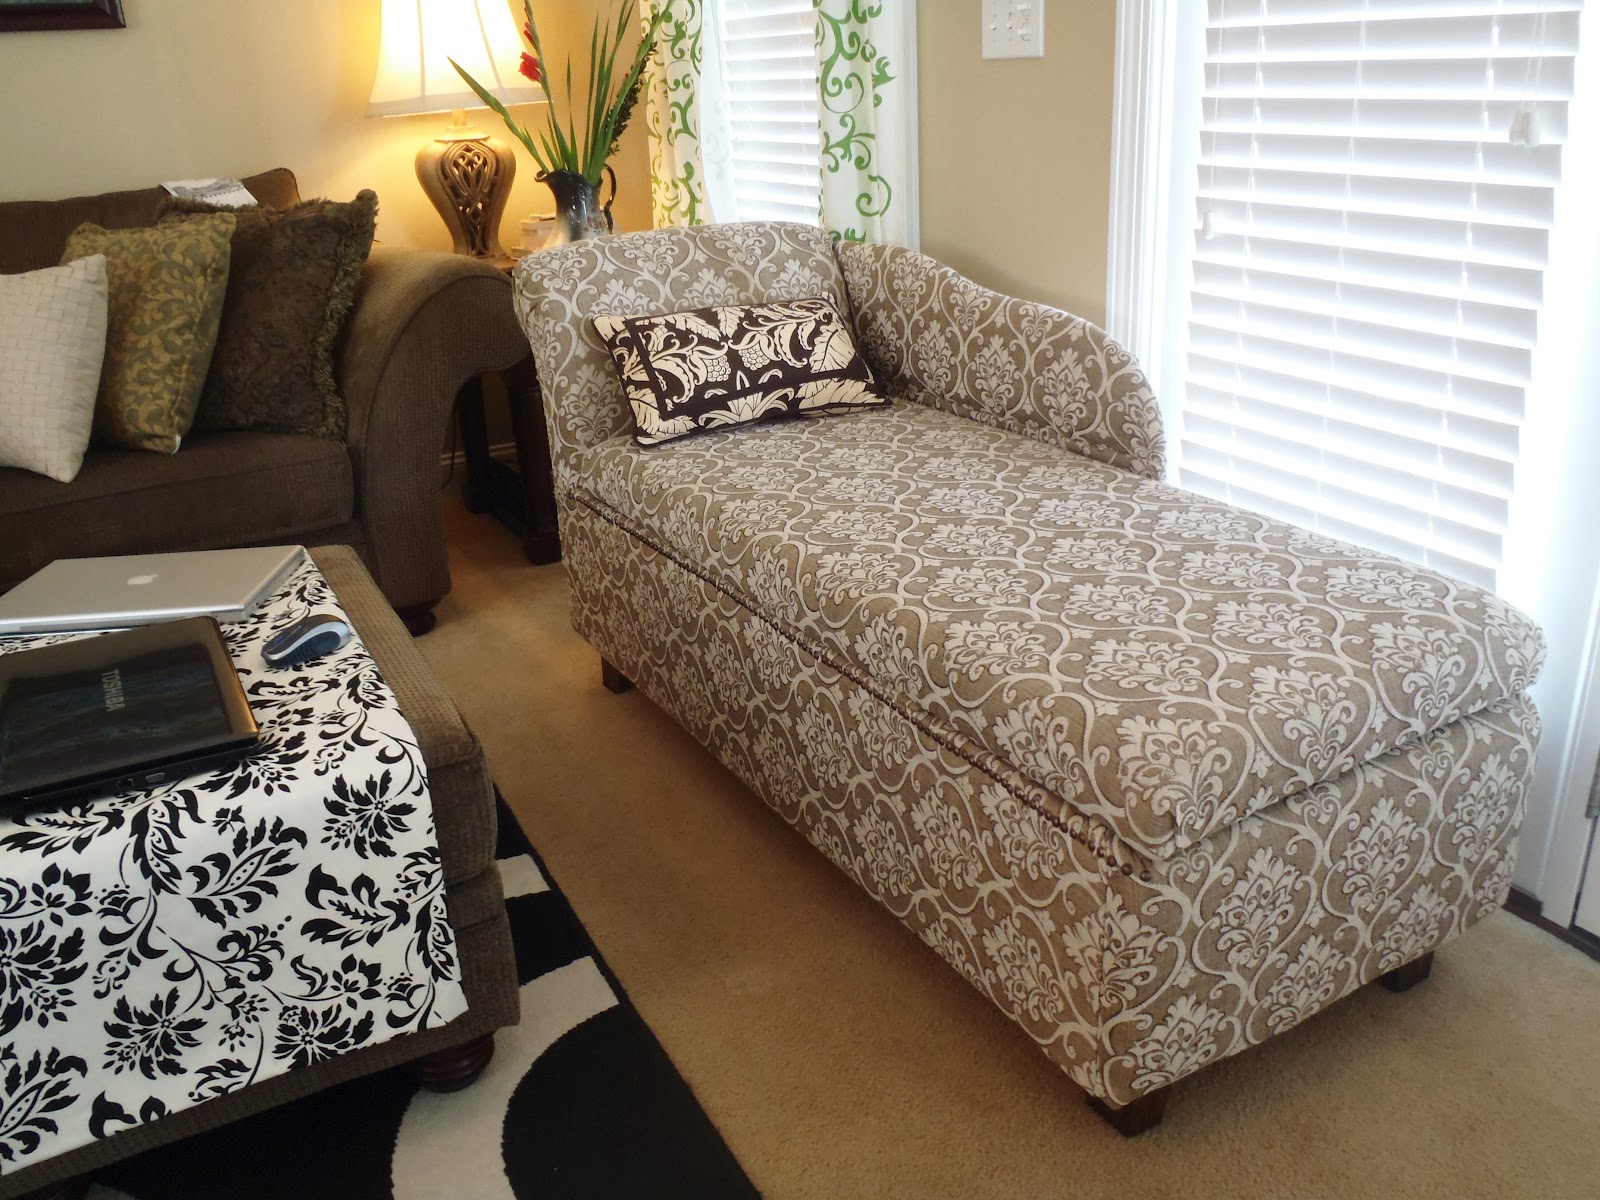 DIY Chaise Lounge with Storage